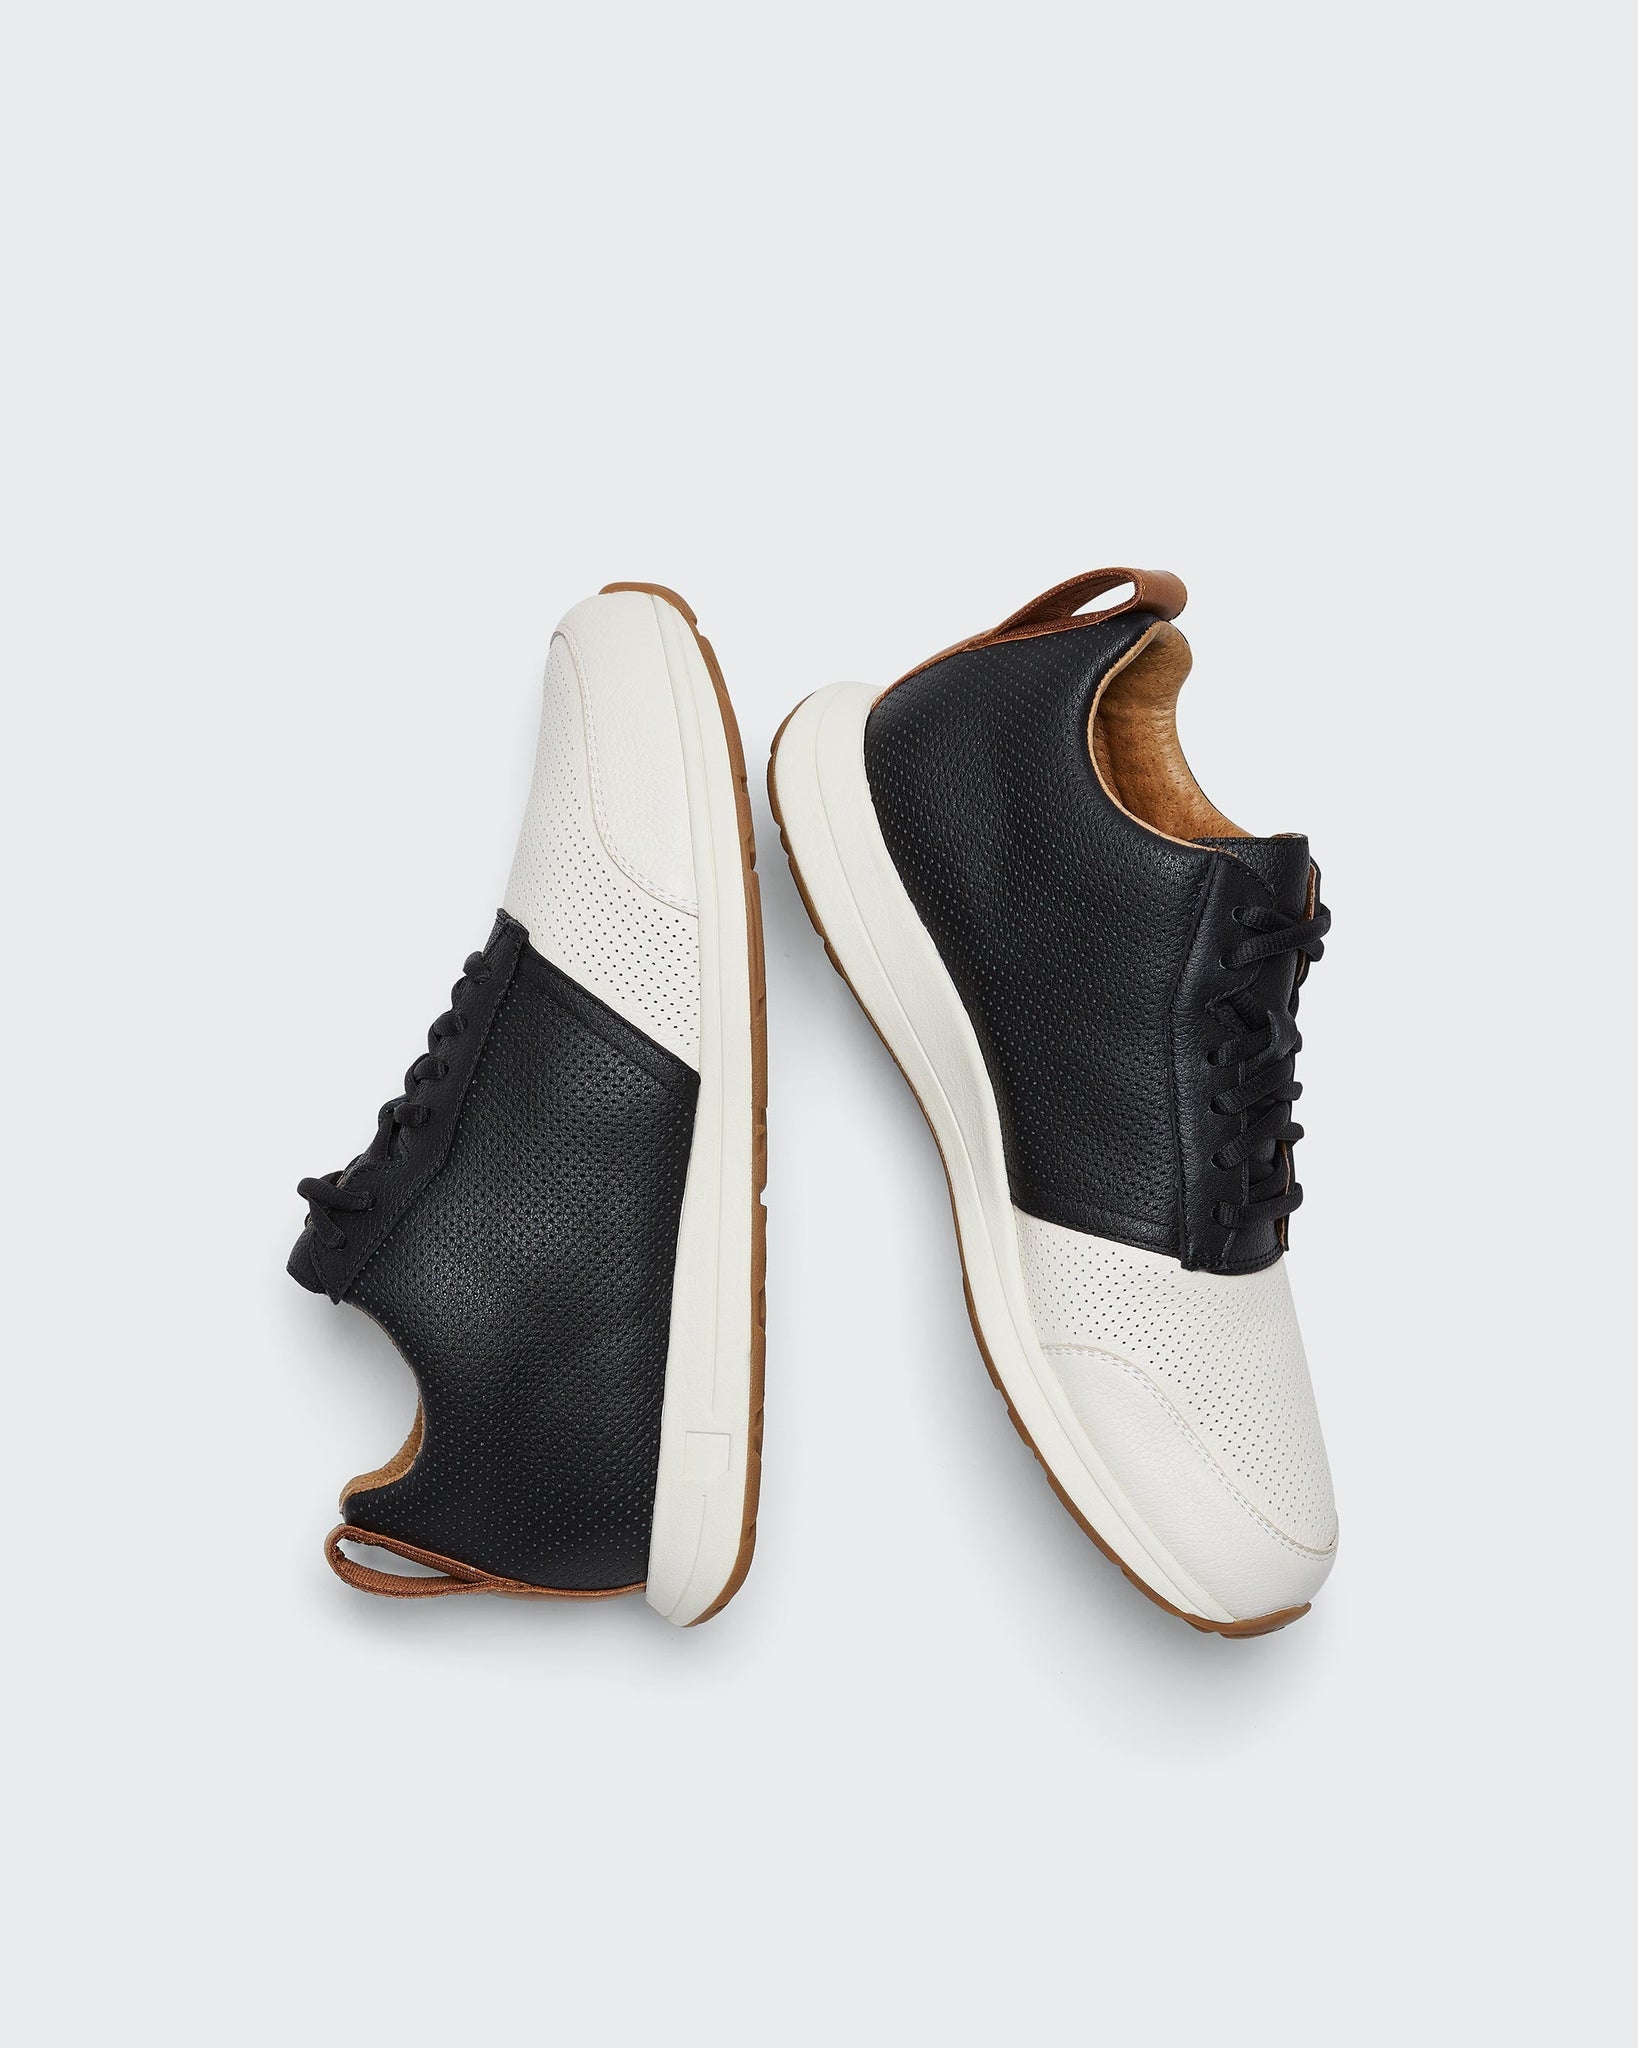 The Henry Mid Trainer / Leather / Black & White by YORK Athletics Mfg.